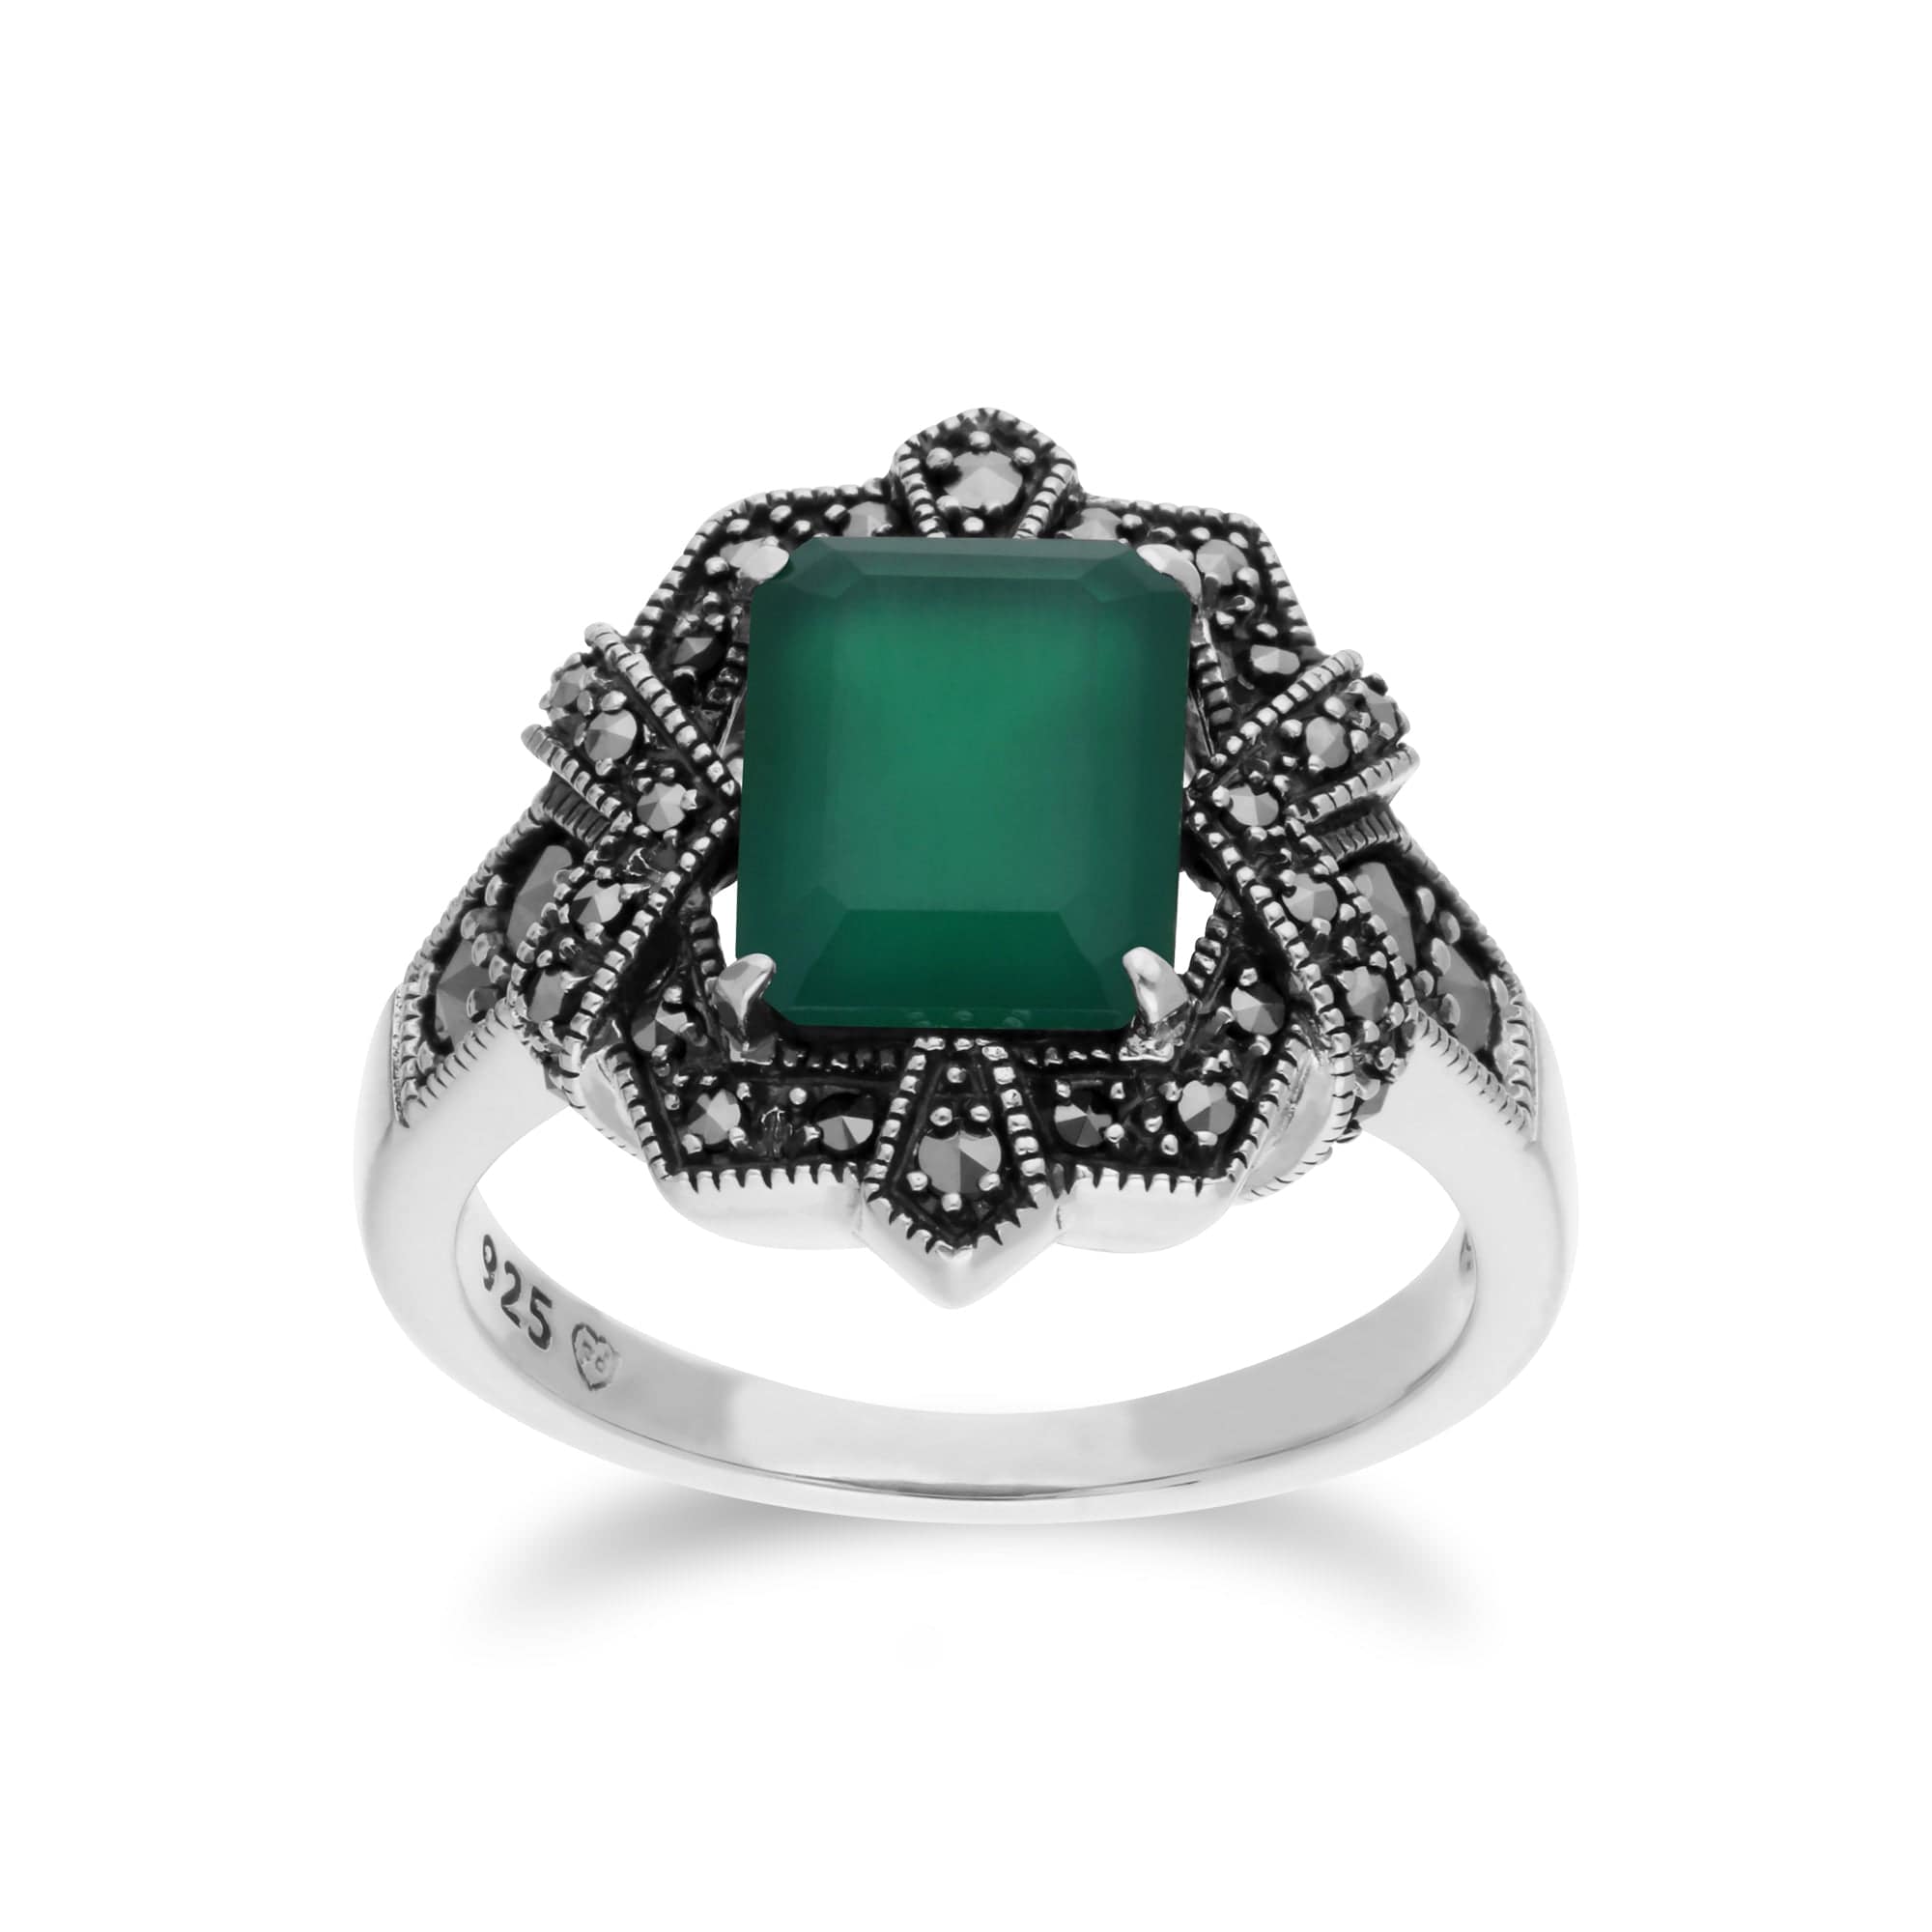 Art Deco Style Baguette Green Chalcedony & Marcasite Ring in 925 Sterling Silver - Gemondo